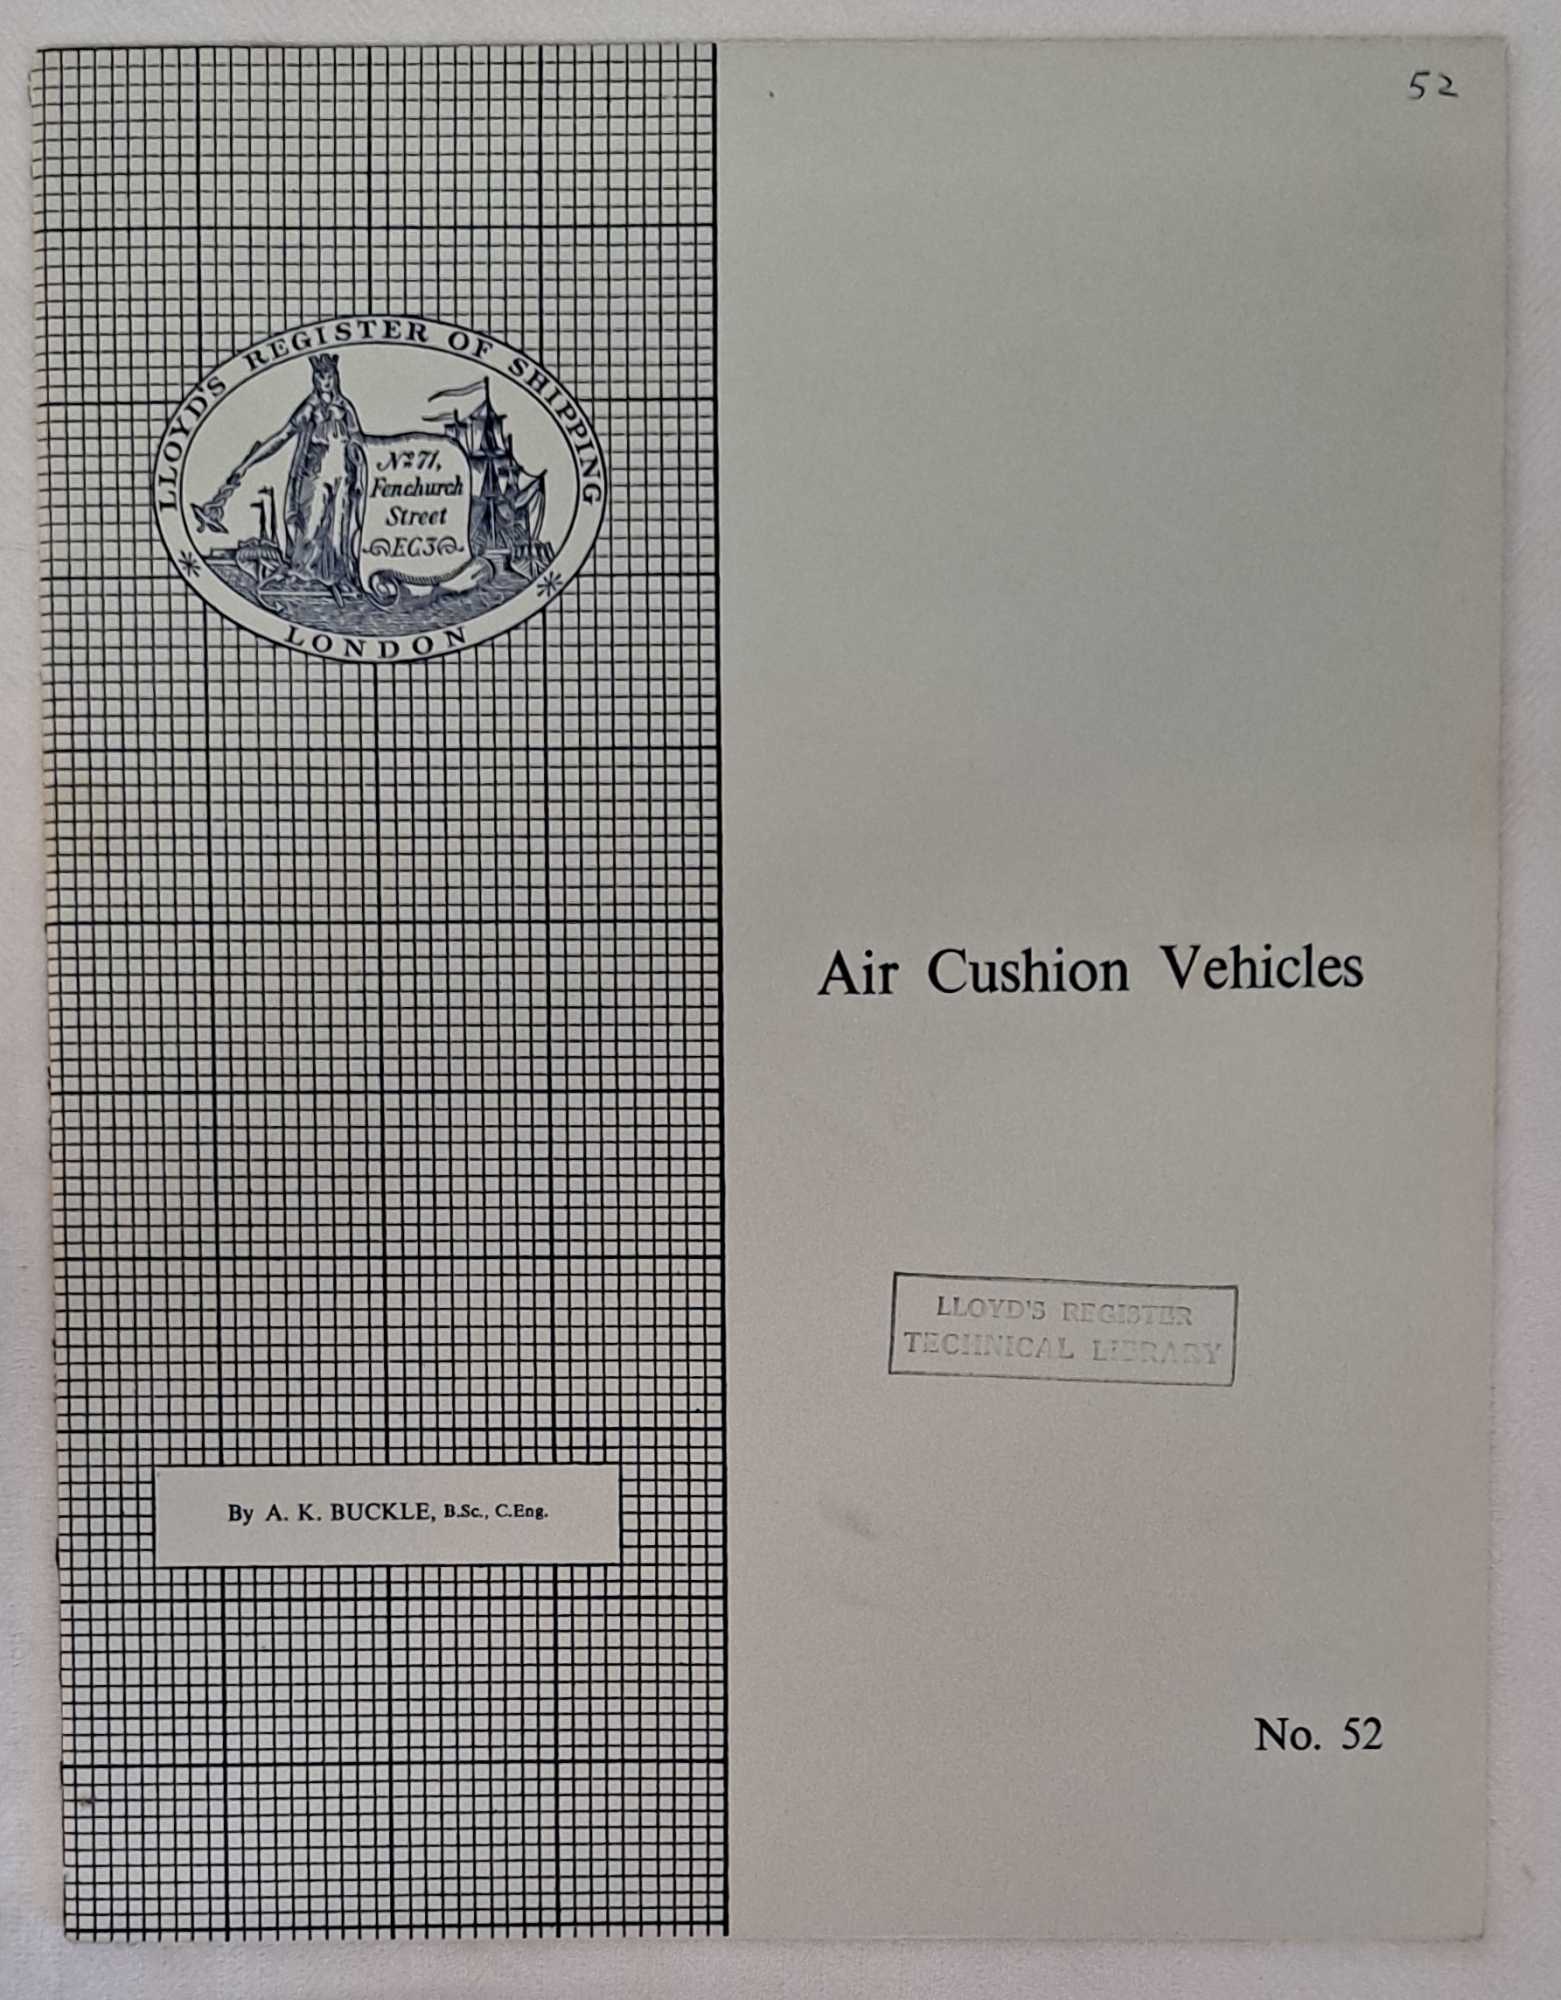 A K Buckle - Air Cushion Vehicles. No. 52, Lloyd's Register Staff Association Papers, Read at Meeting on 5th February 1967